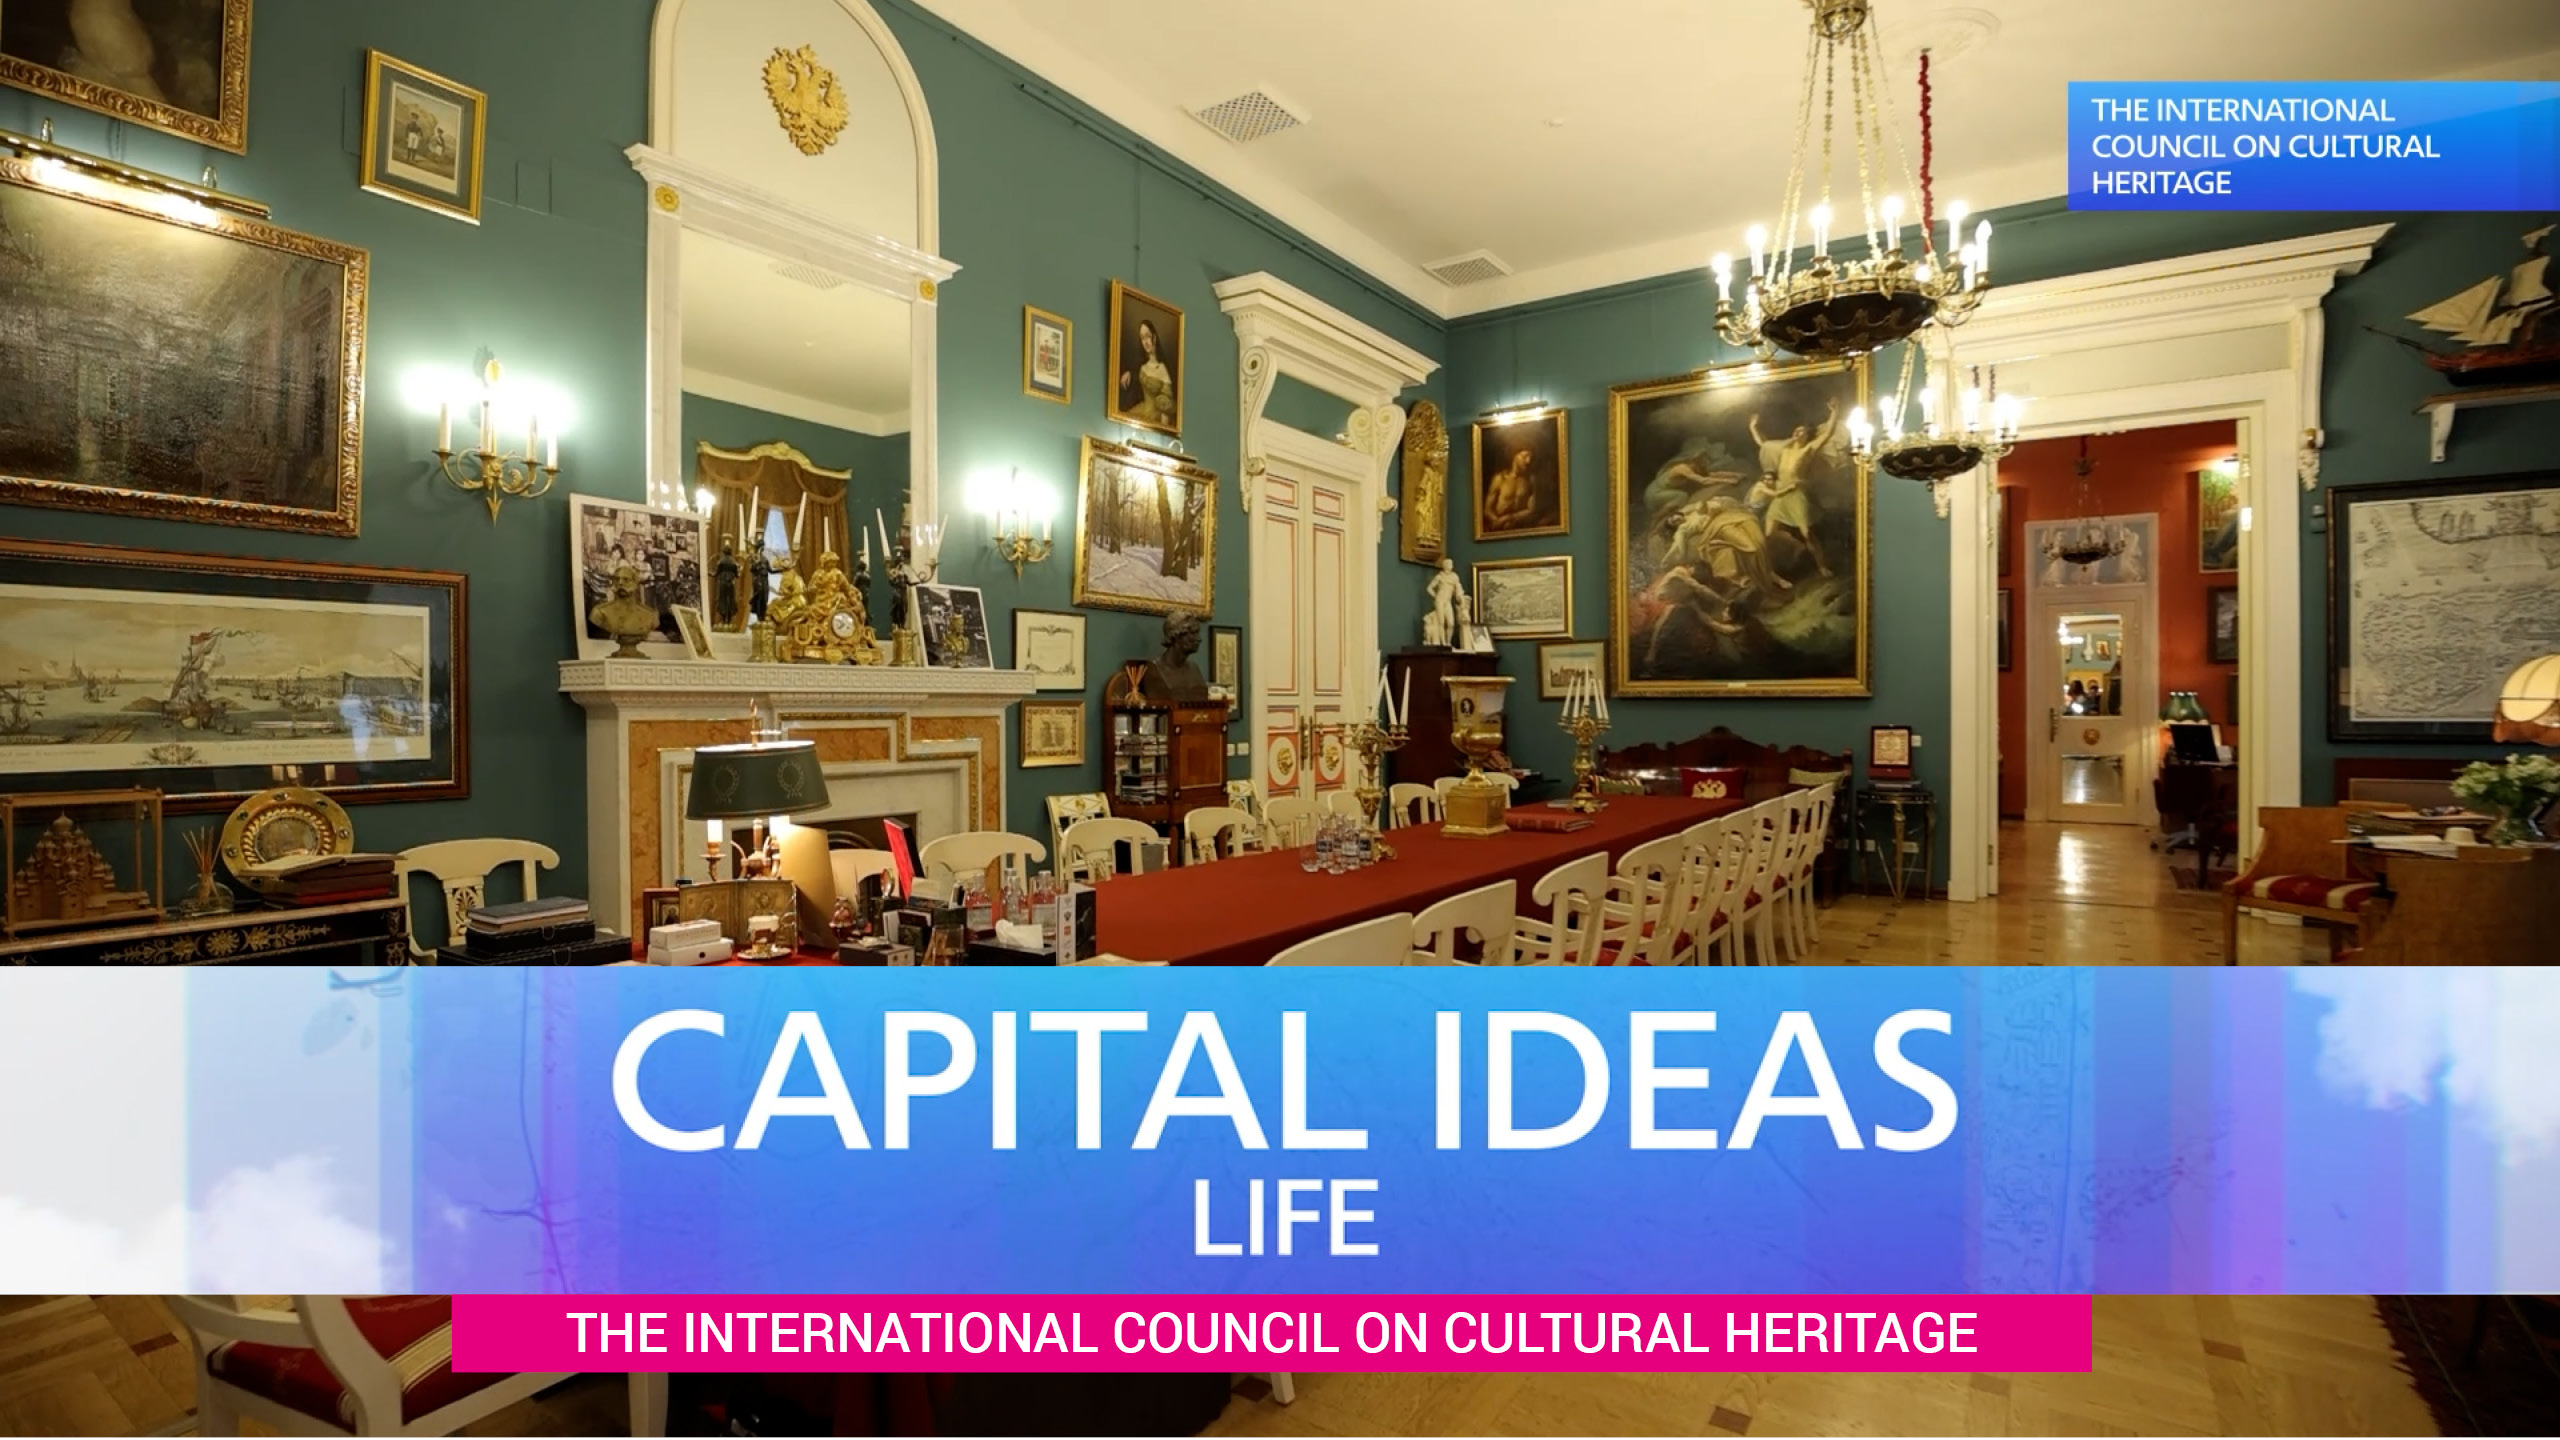 CAPITAL IDEAS LIFE - THE INTERNATIONAL COUNCIL ON CULTURAL HERITAGE